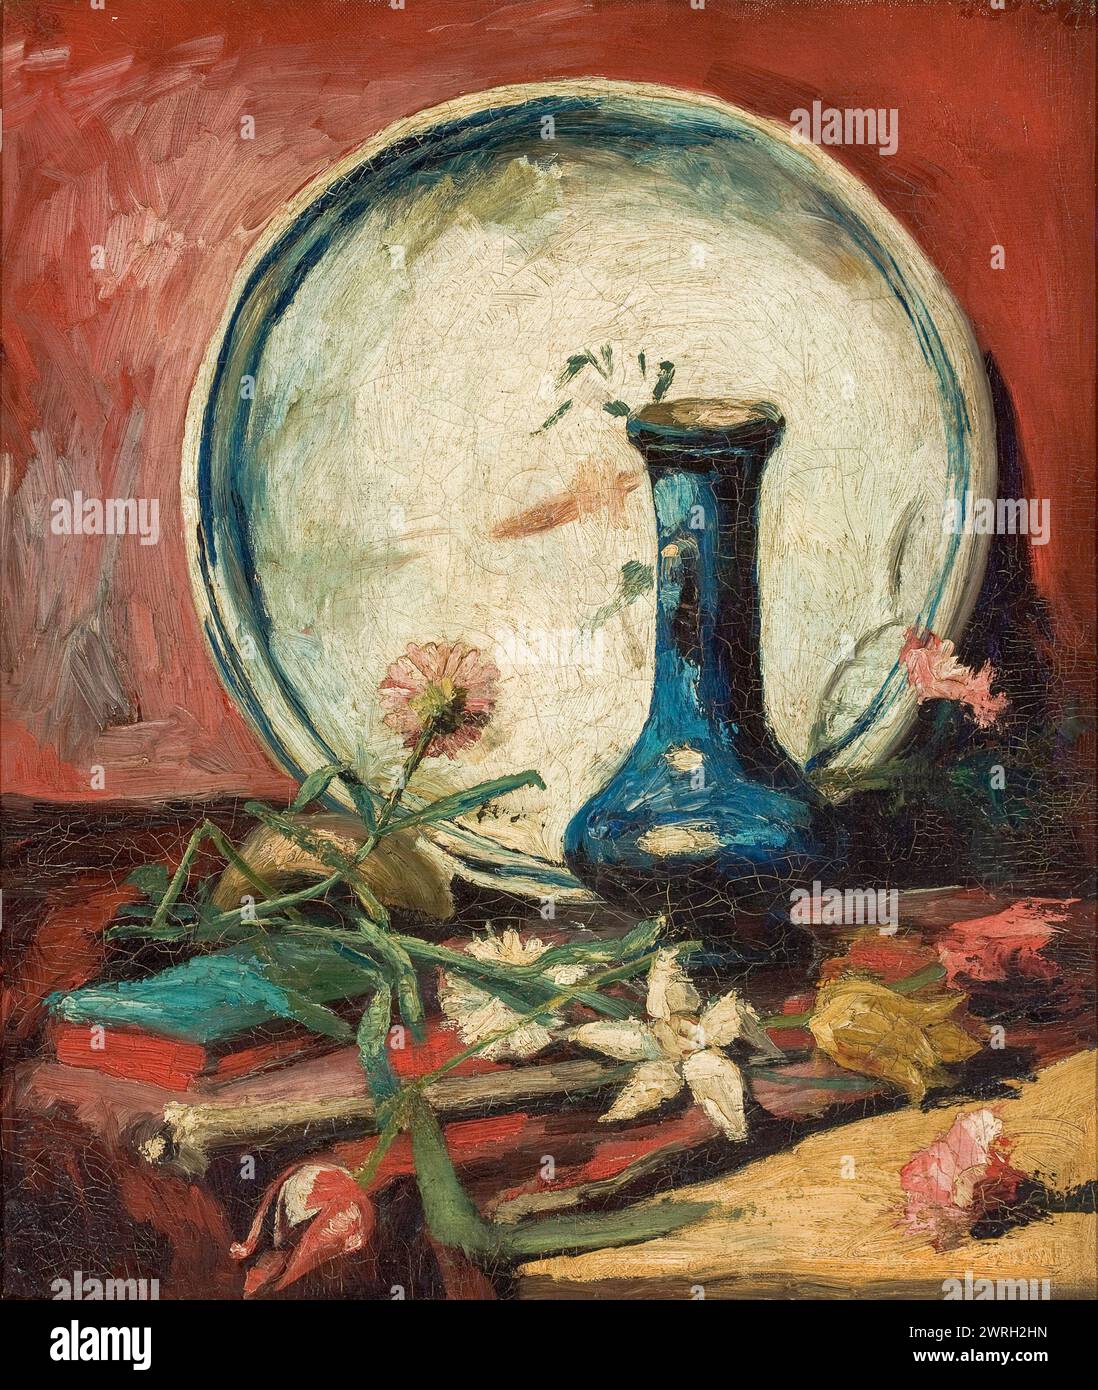 Still Life with Plate, Vase and Flowers, 1884-1885. Found in the Collection of the Museu de Arte de S&#xe3;o Paulo. Stock Photo